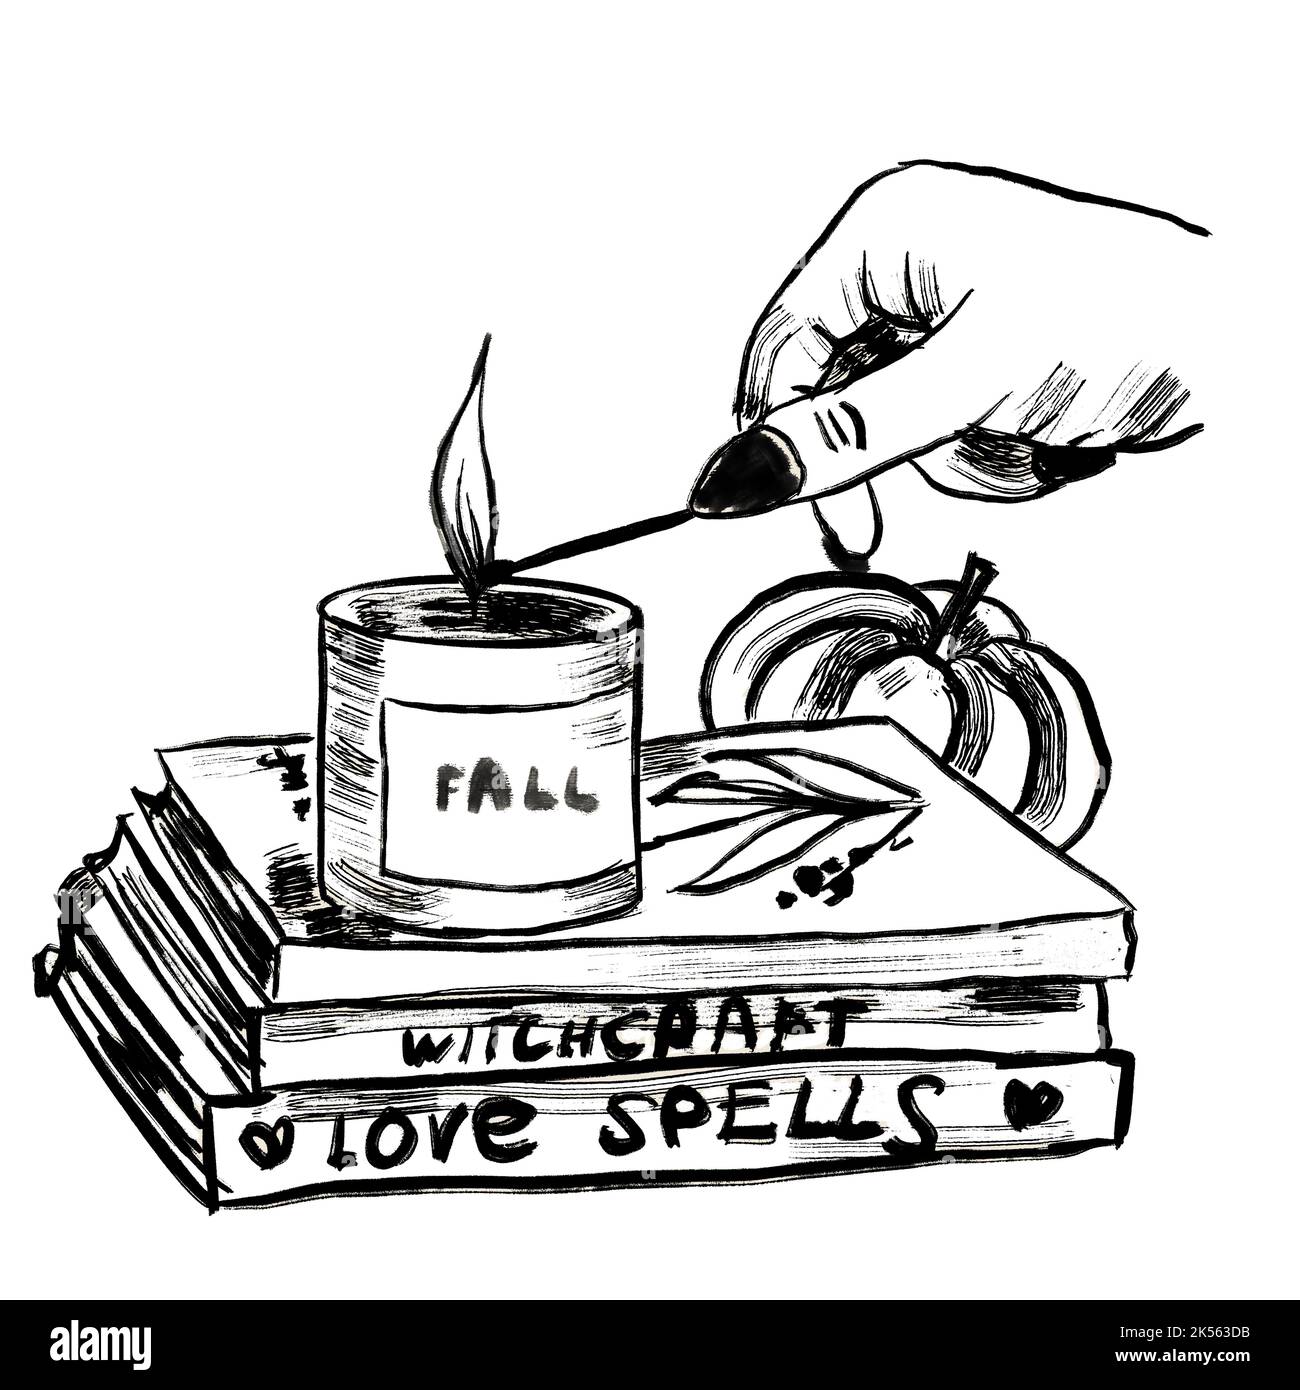 Hand drawn illsutration of witch hand with candle witchcraft books love spells. Black line monochrome design in ink inking shape silhouette outline, minimalist drawing sketch Stock Photo